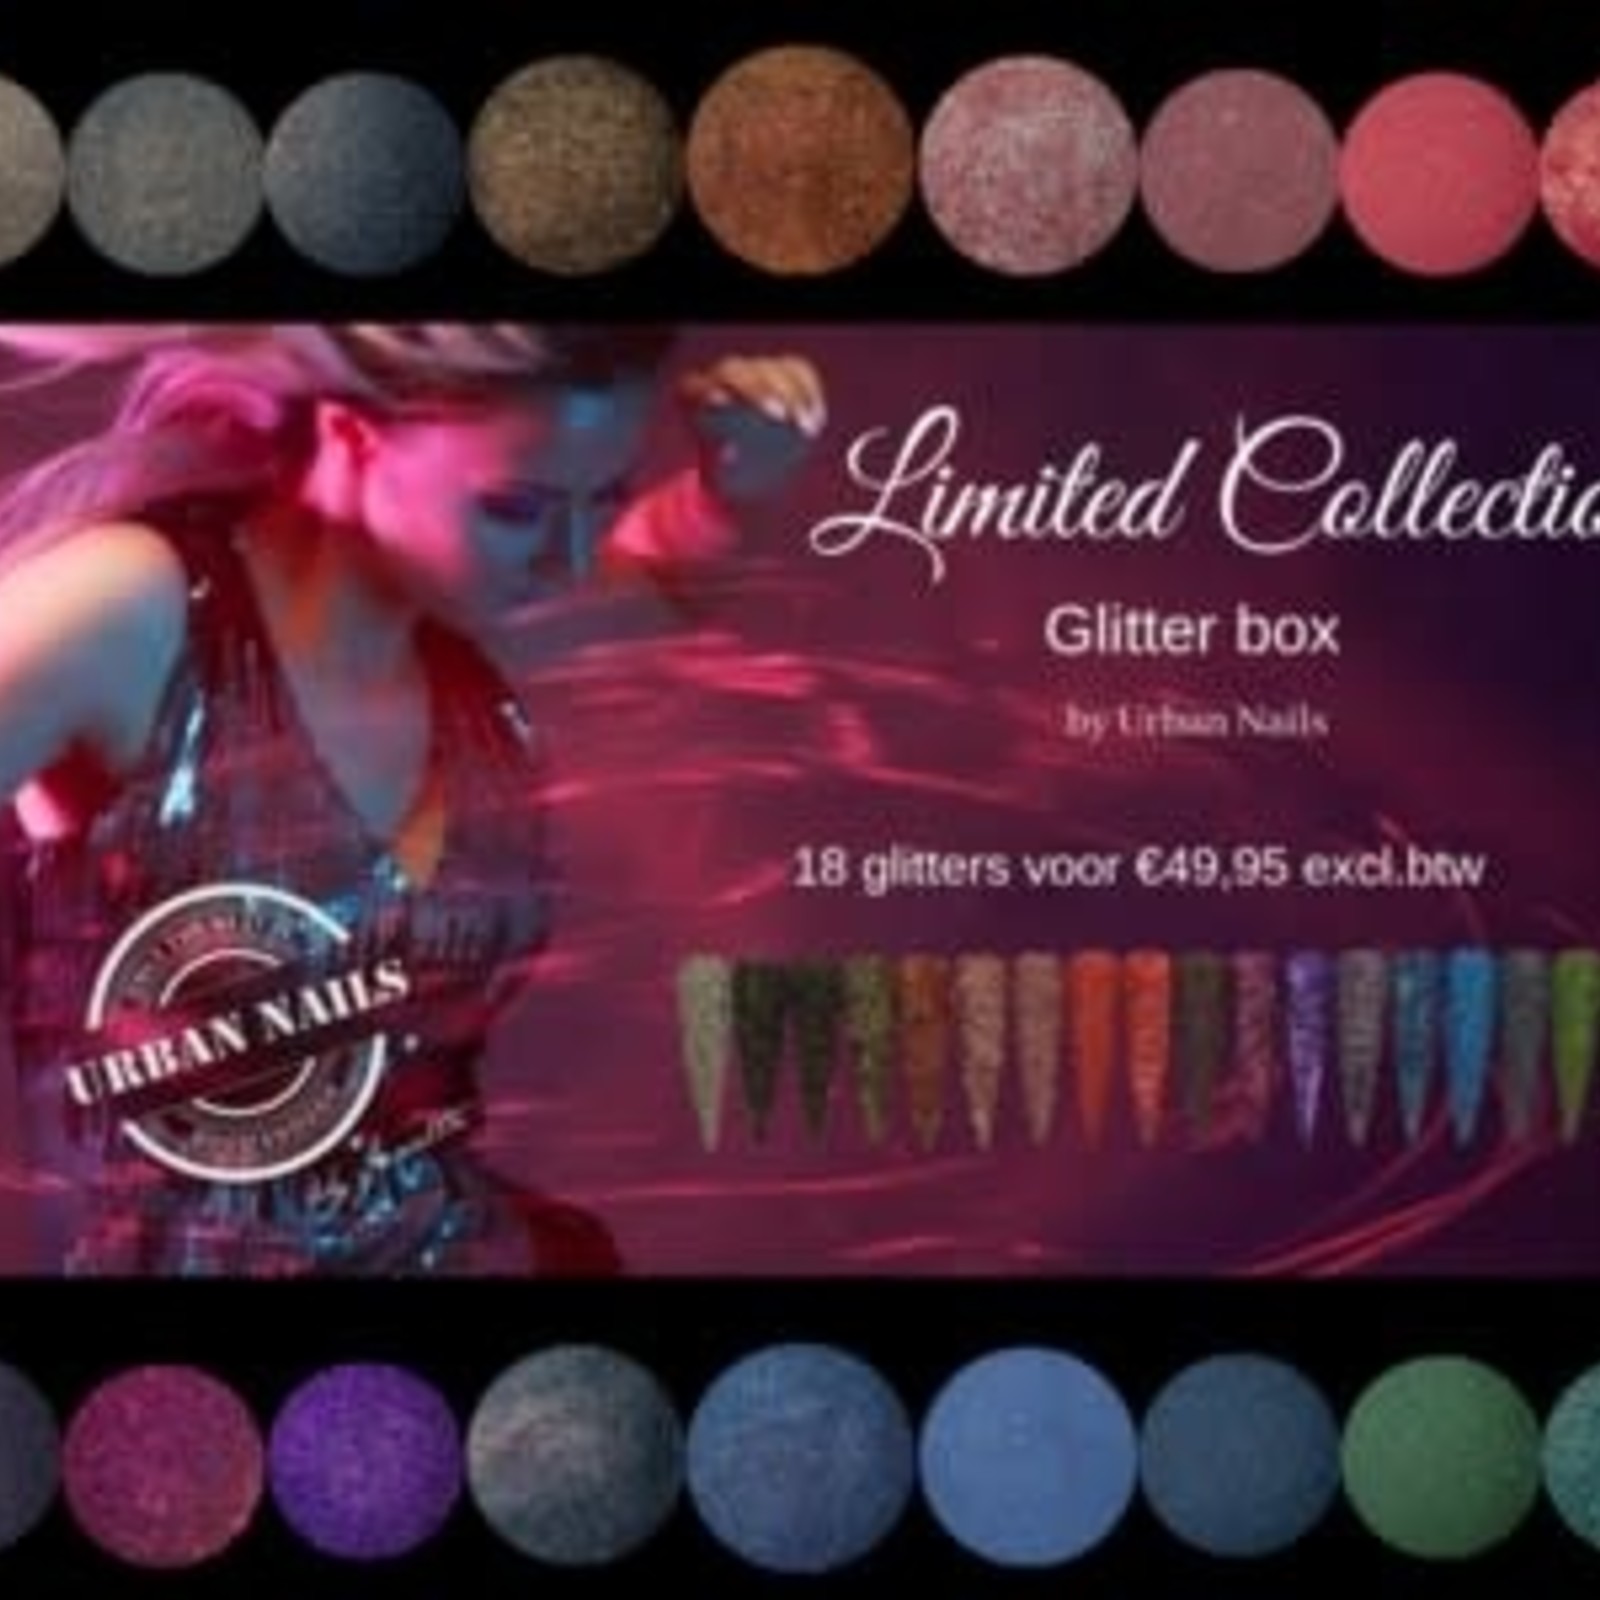 Urban nails Limited Collection Glitter Box